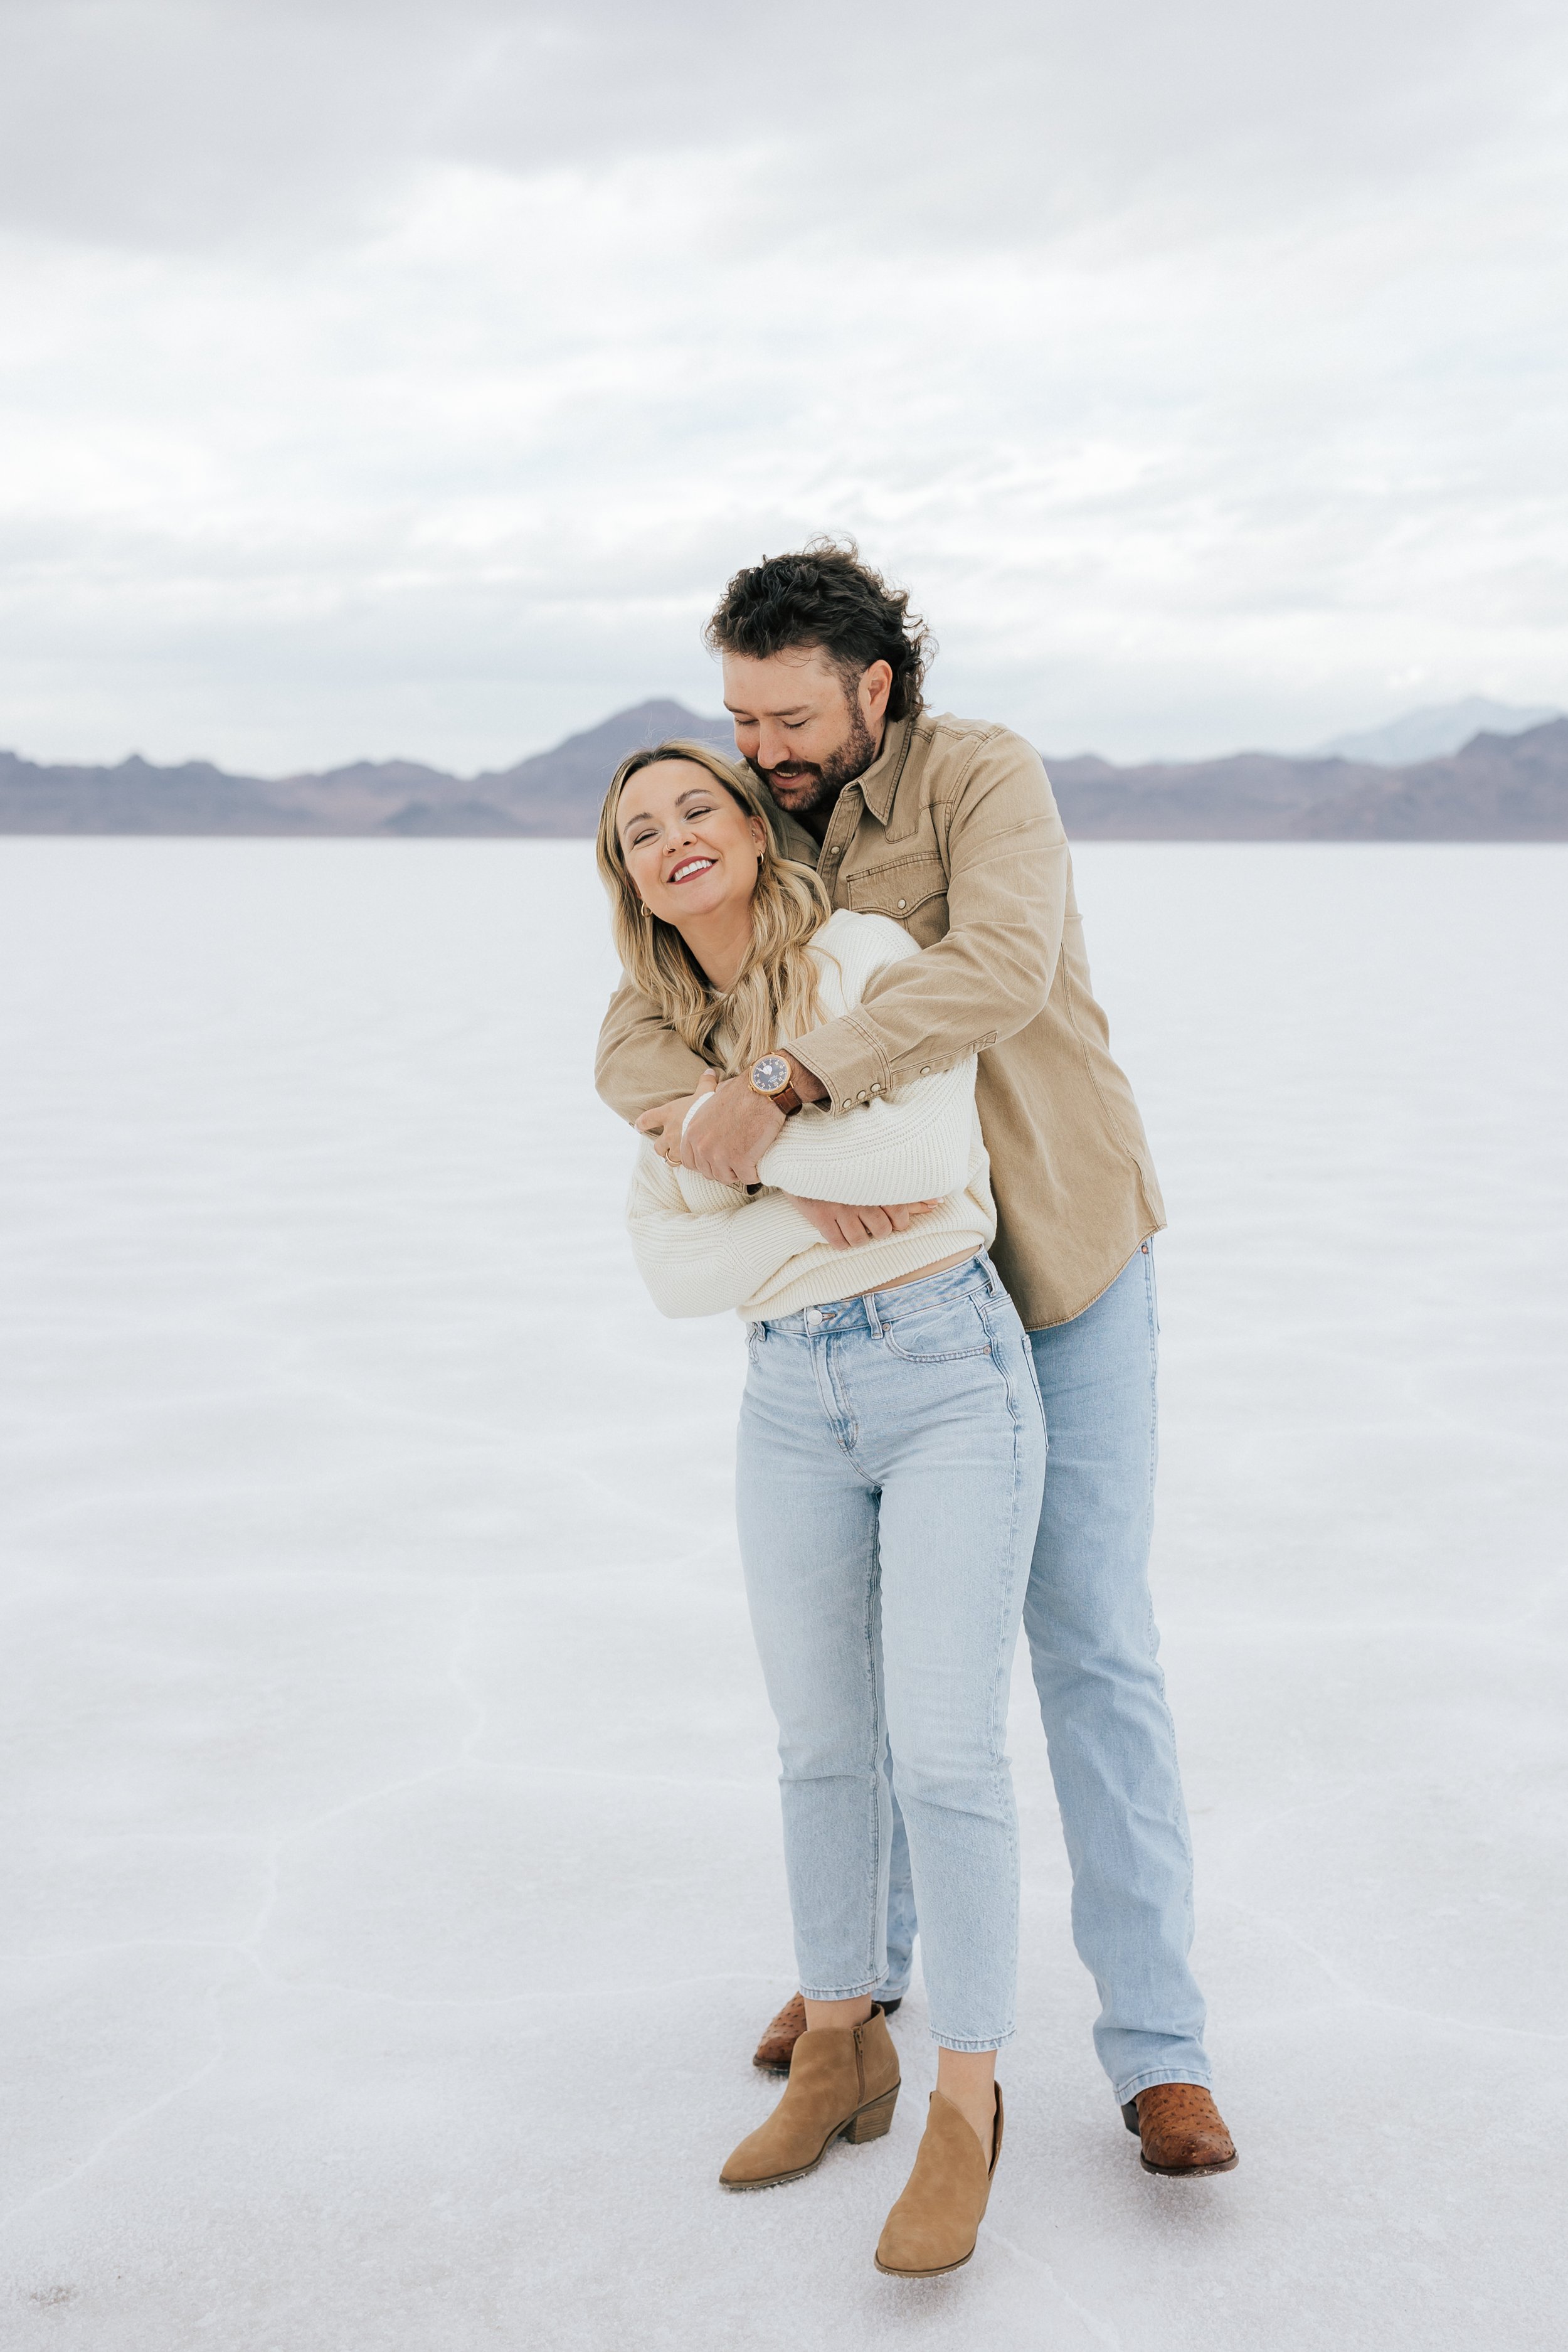  An engaged couple laughs and hugs as they pose for a photo at the Bonneville Salt Flats near Wendover, Nevada and Salt Lake City, Utah. The Salt Flats are white and the sky is overcast. The mountains show behind. Engagement session at the Utah Salt 